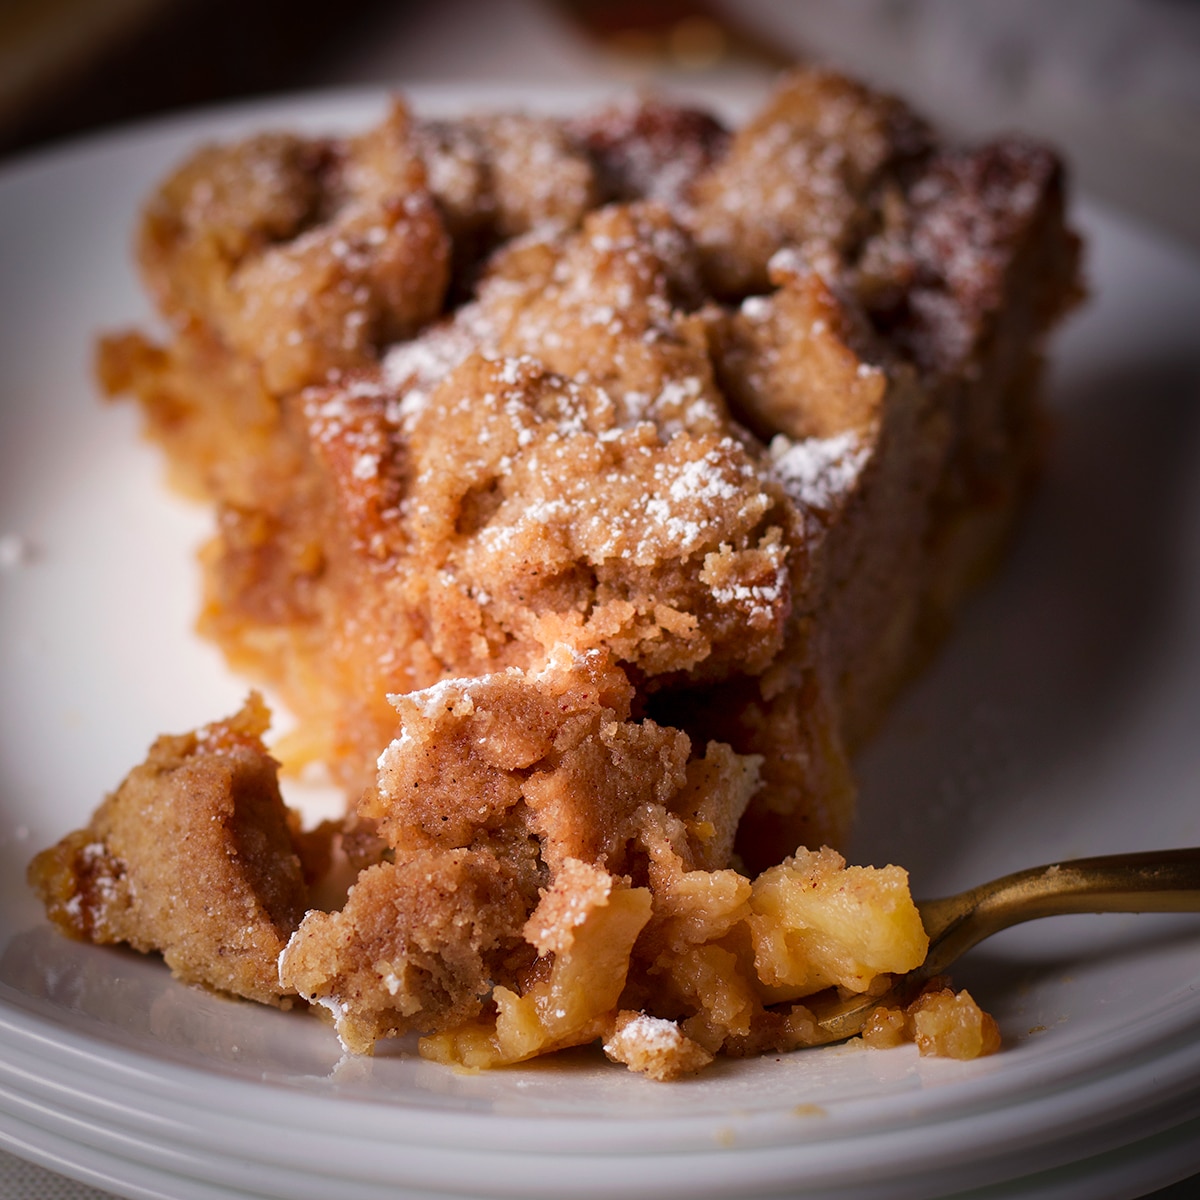 Using a fork to cut a bite of apple crumb cake from a slice.